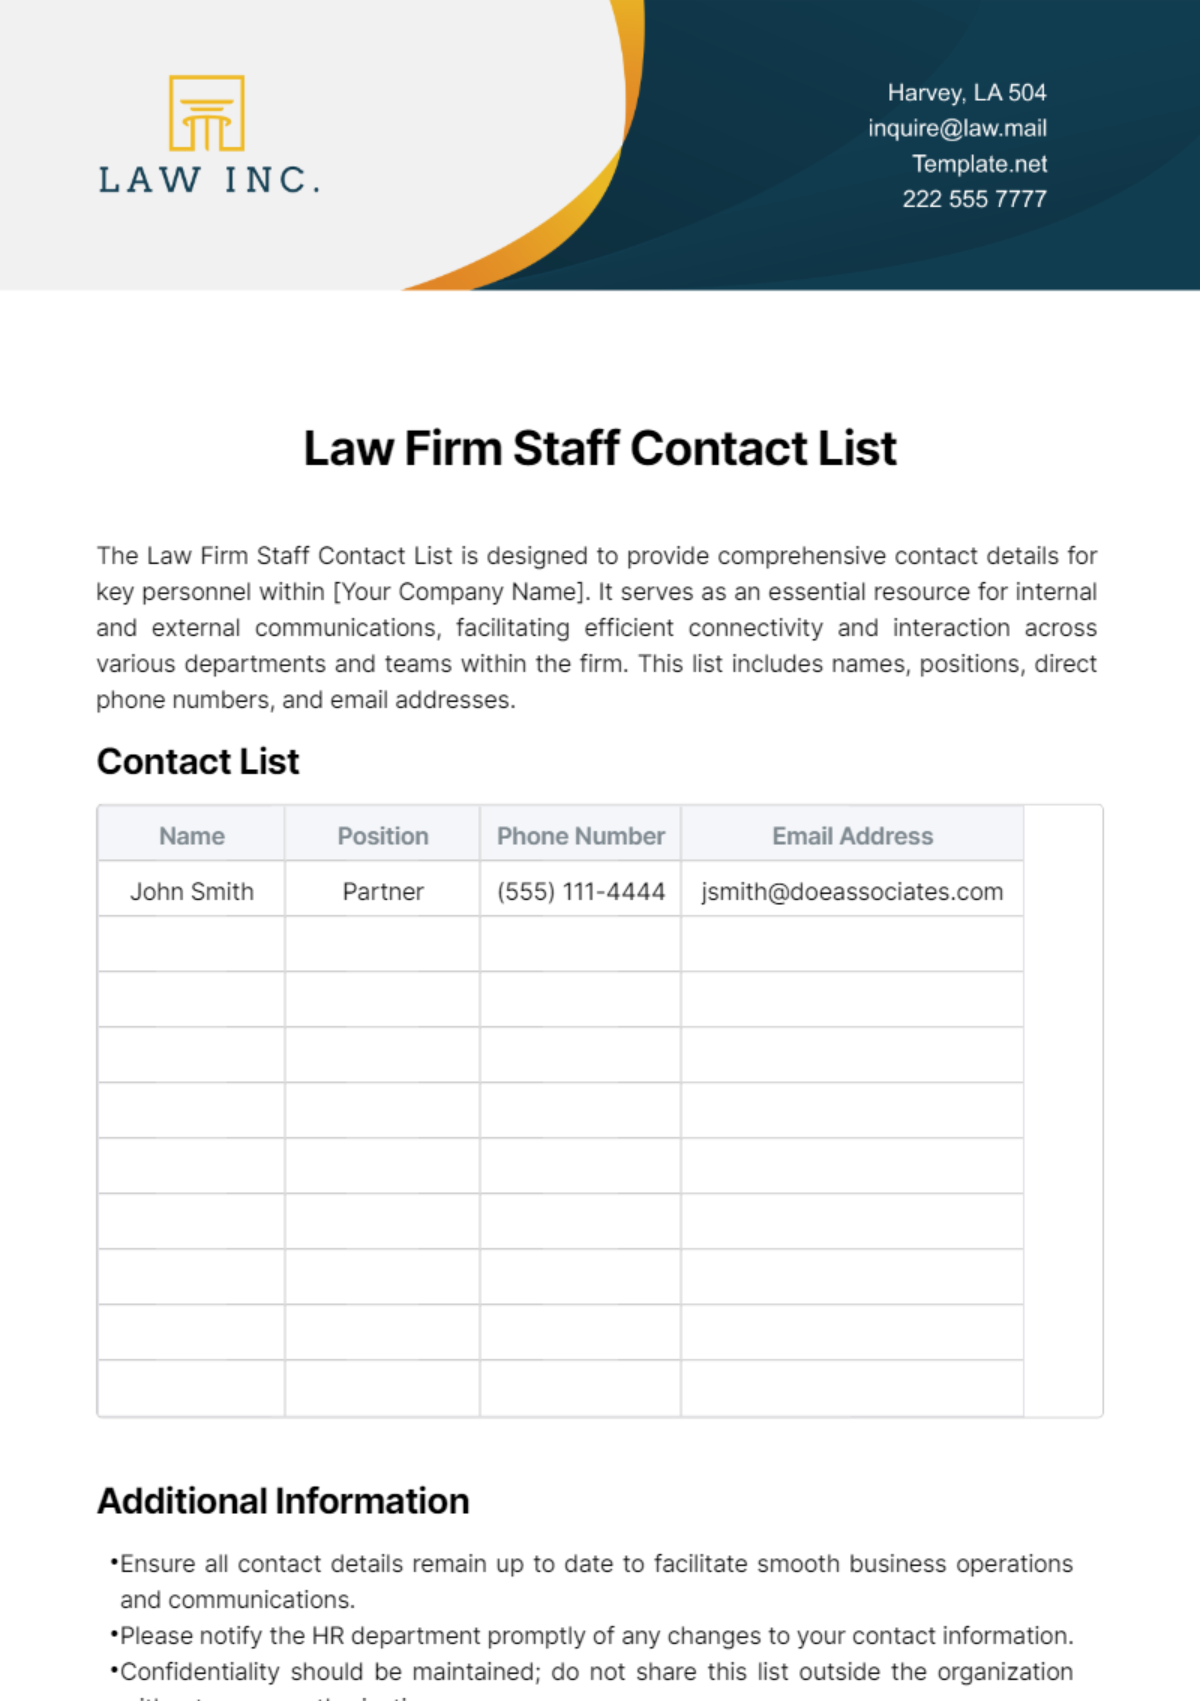 Law Firm Staff Contact List Template